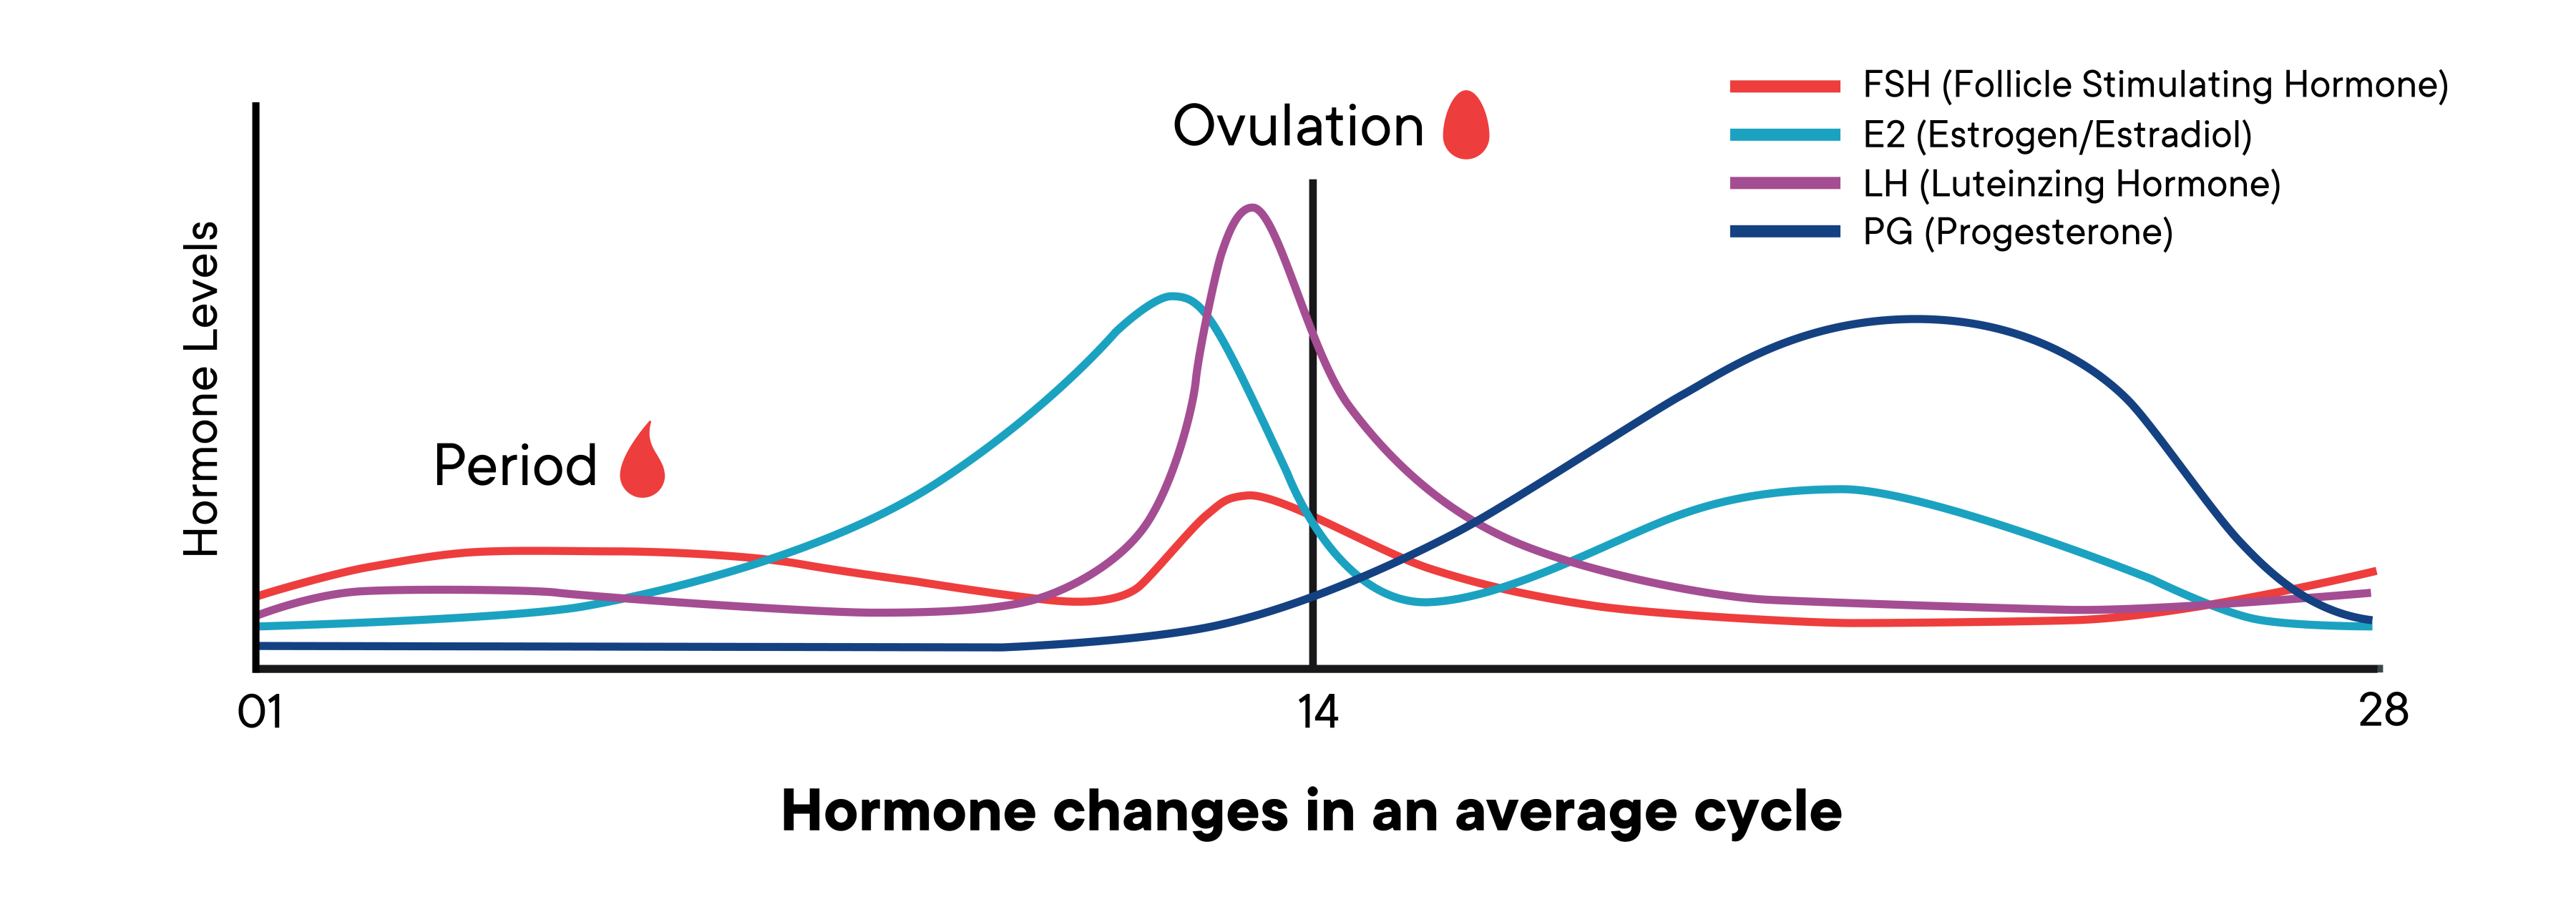 A graph showing the changes of hormone levels in an average cycle over time